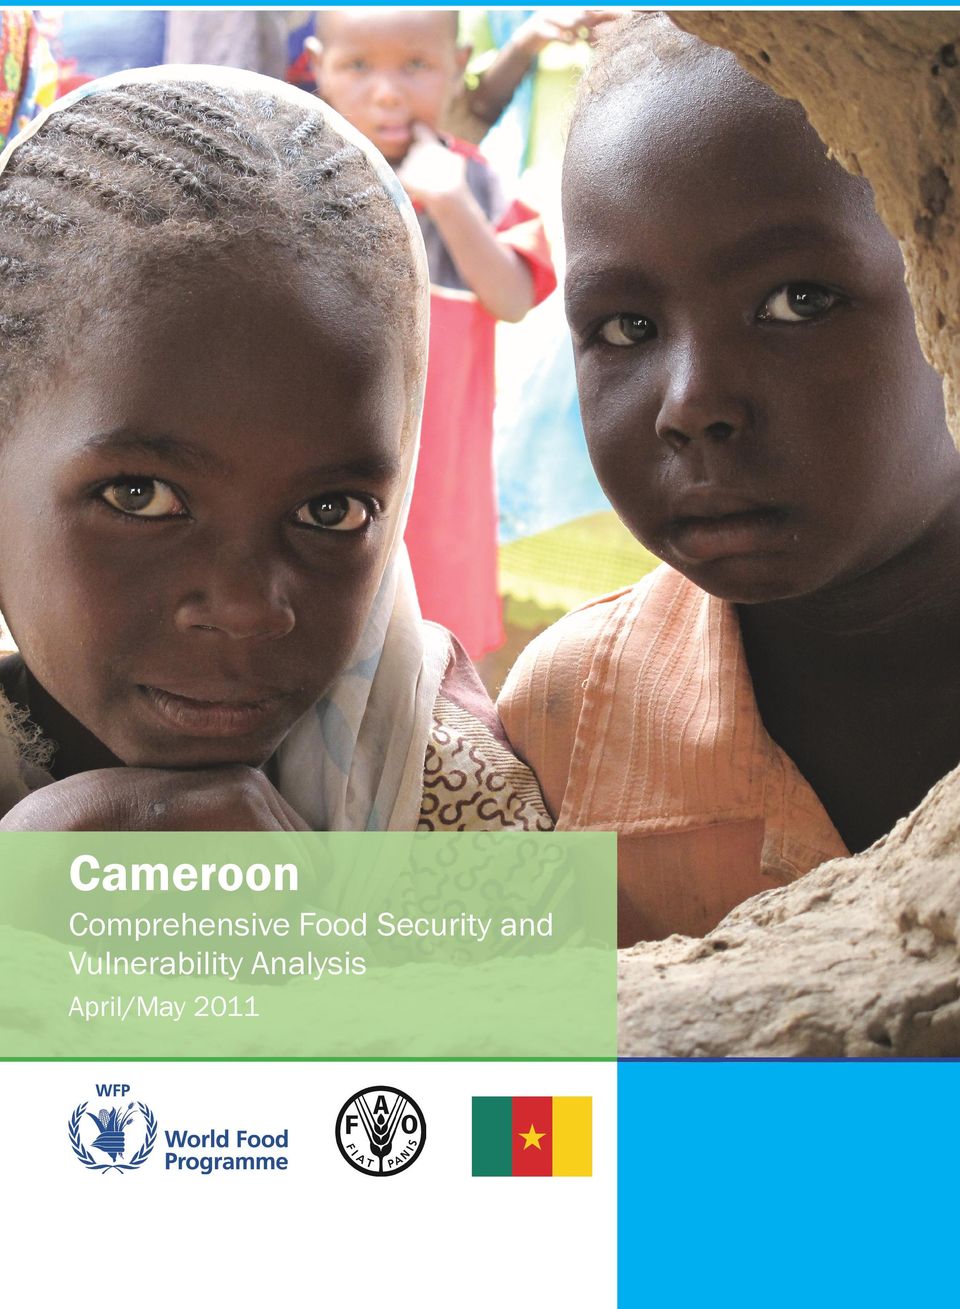 Food Security and